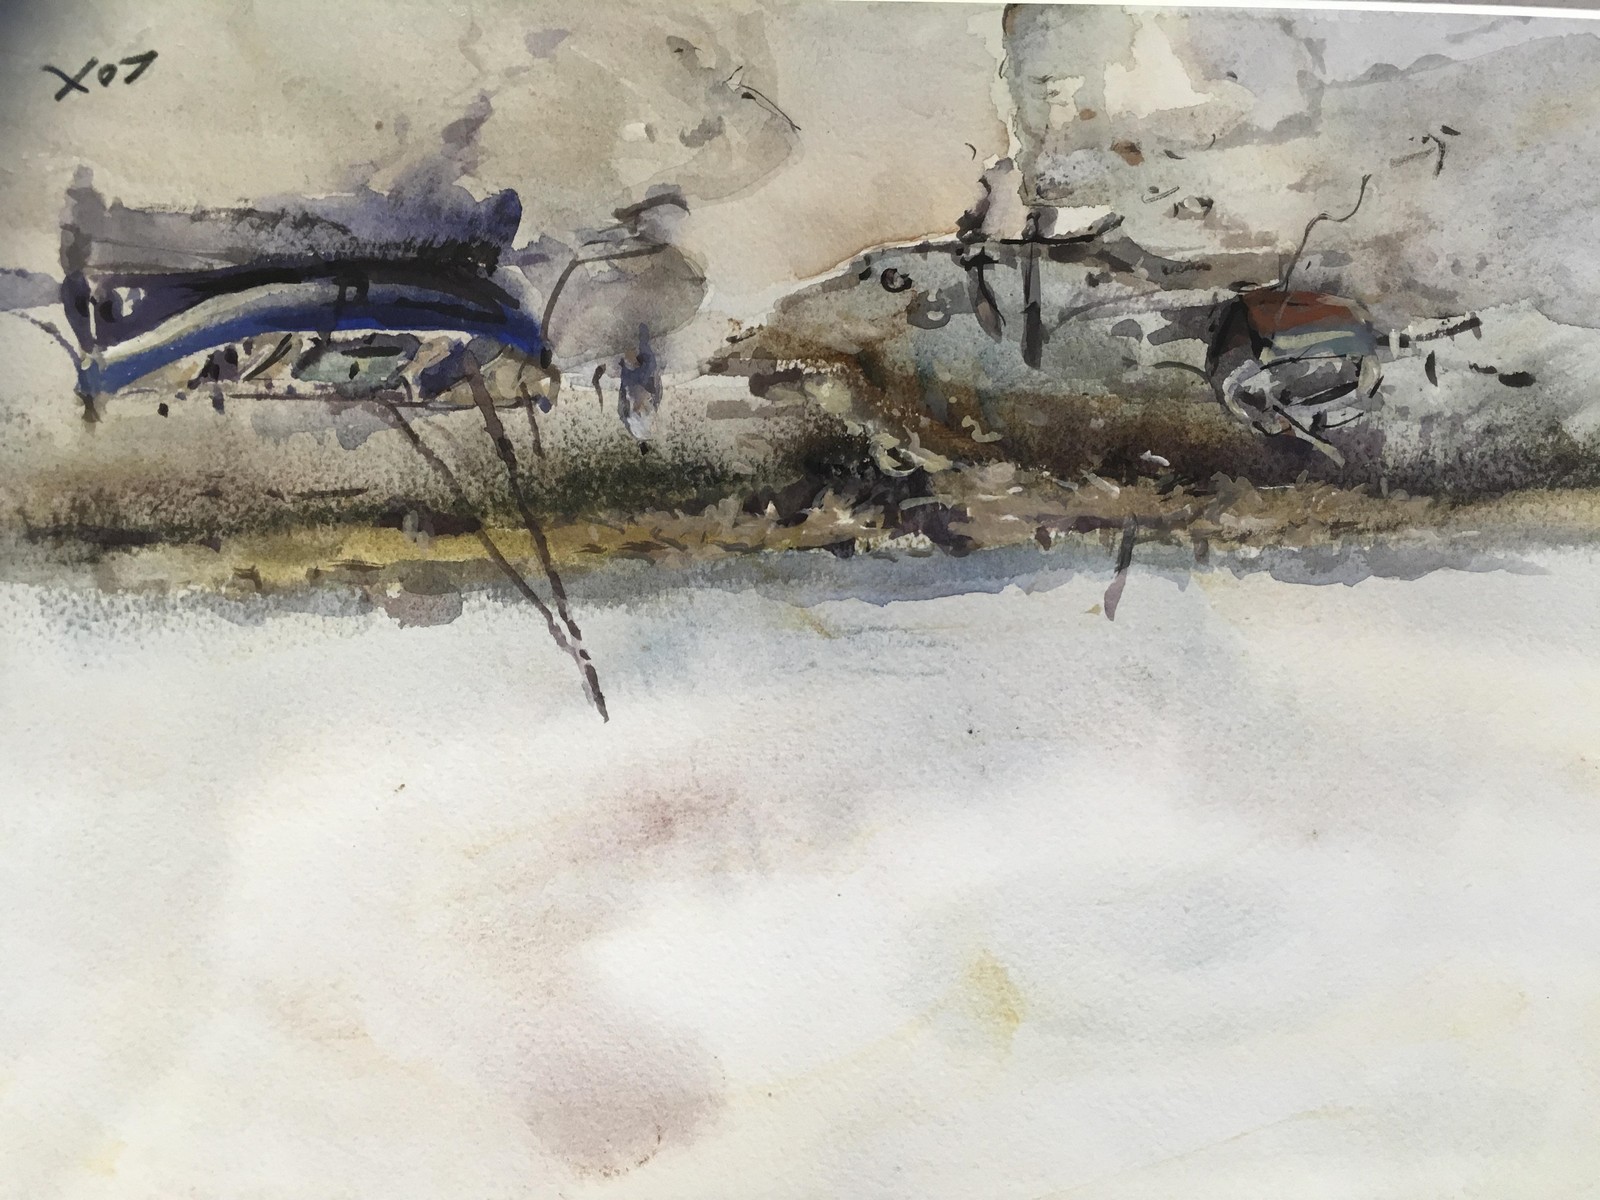 WATERCOLOUR "FISHING BOATS ON MUD FLATS" 24 X 34 CM BEARING SIGNATURE COX (MOUNTED BUT UNFRAMED) - Image 2 of 3